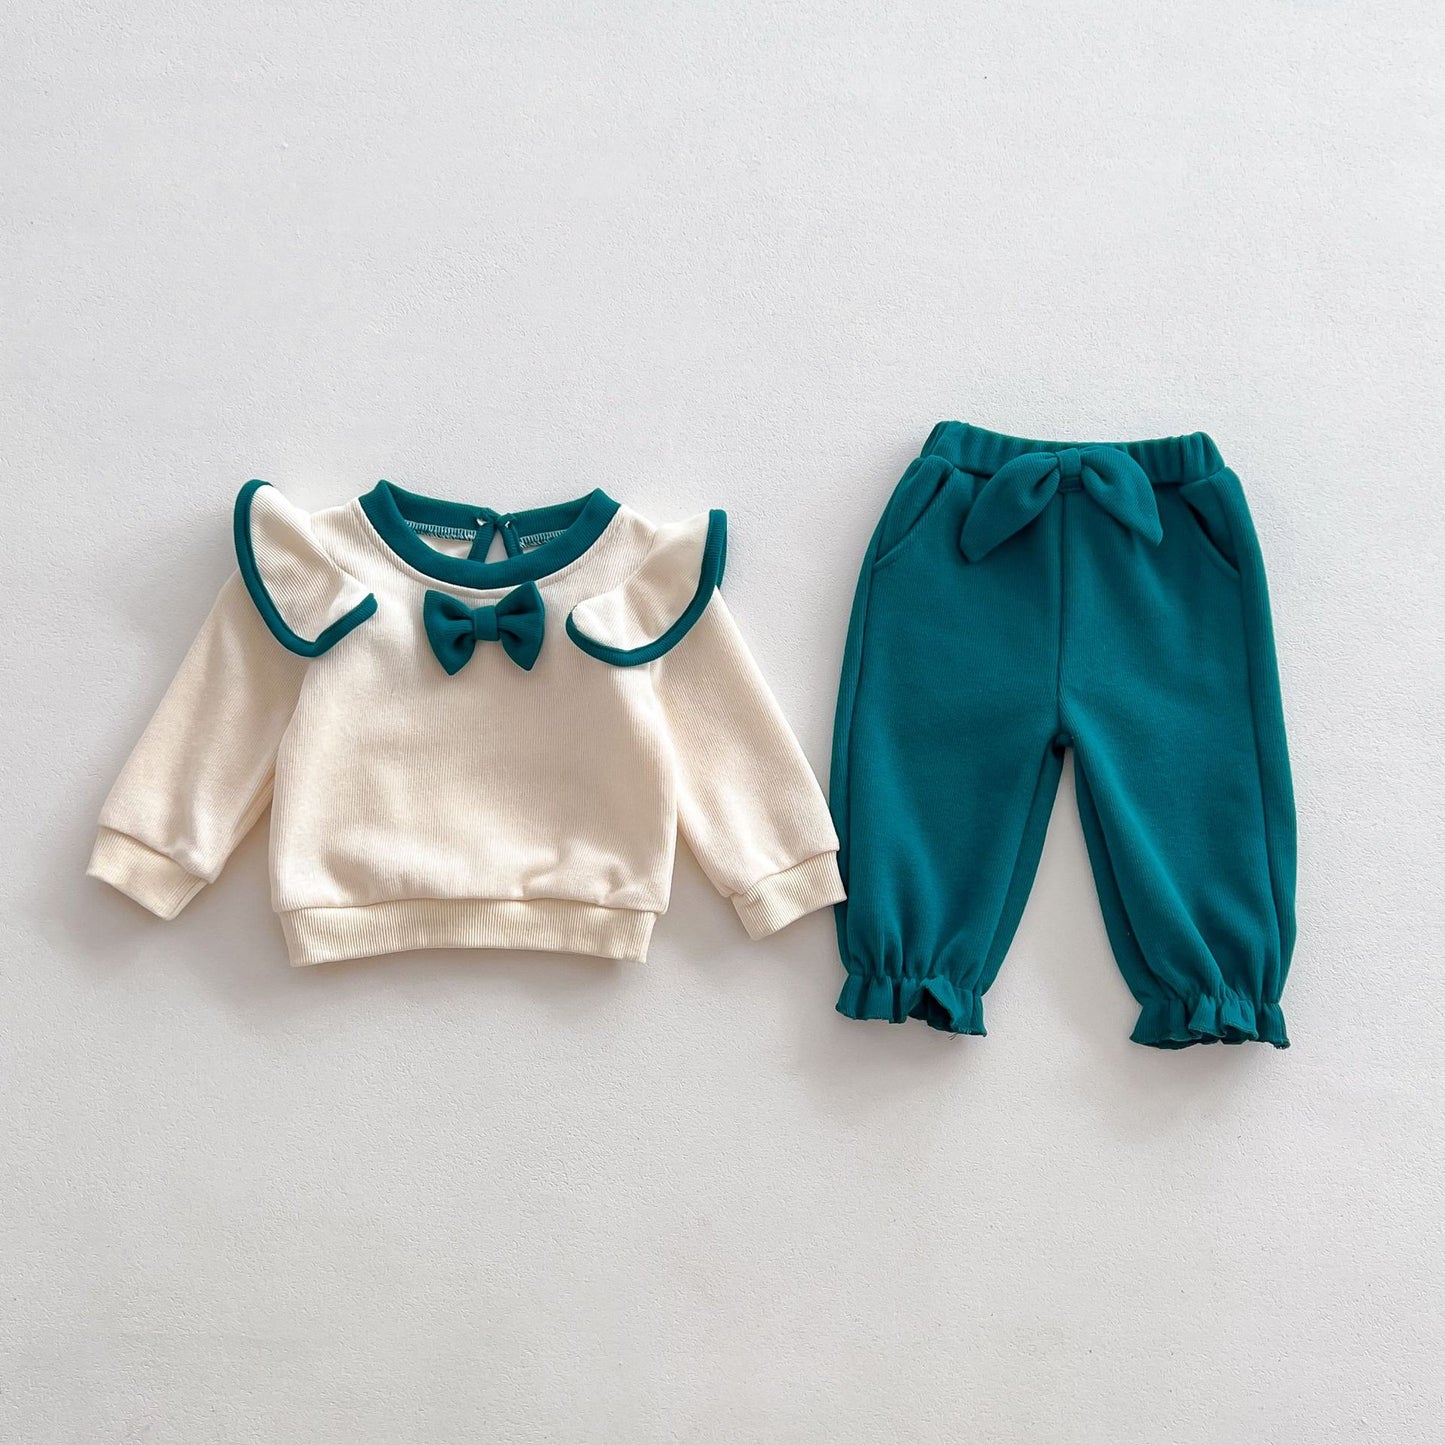 Girls' Fall Outfits Bowknot Flying Sleeve Top Trousers Two-Piece Sets